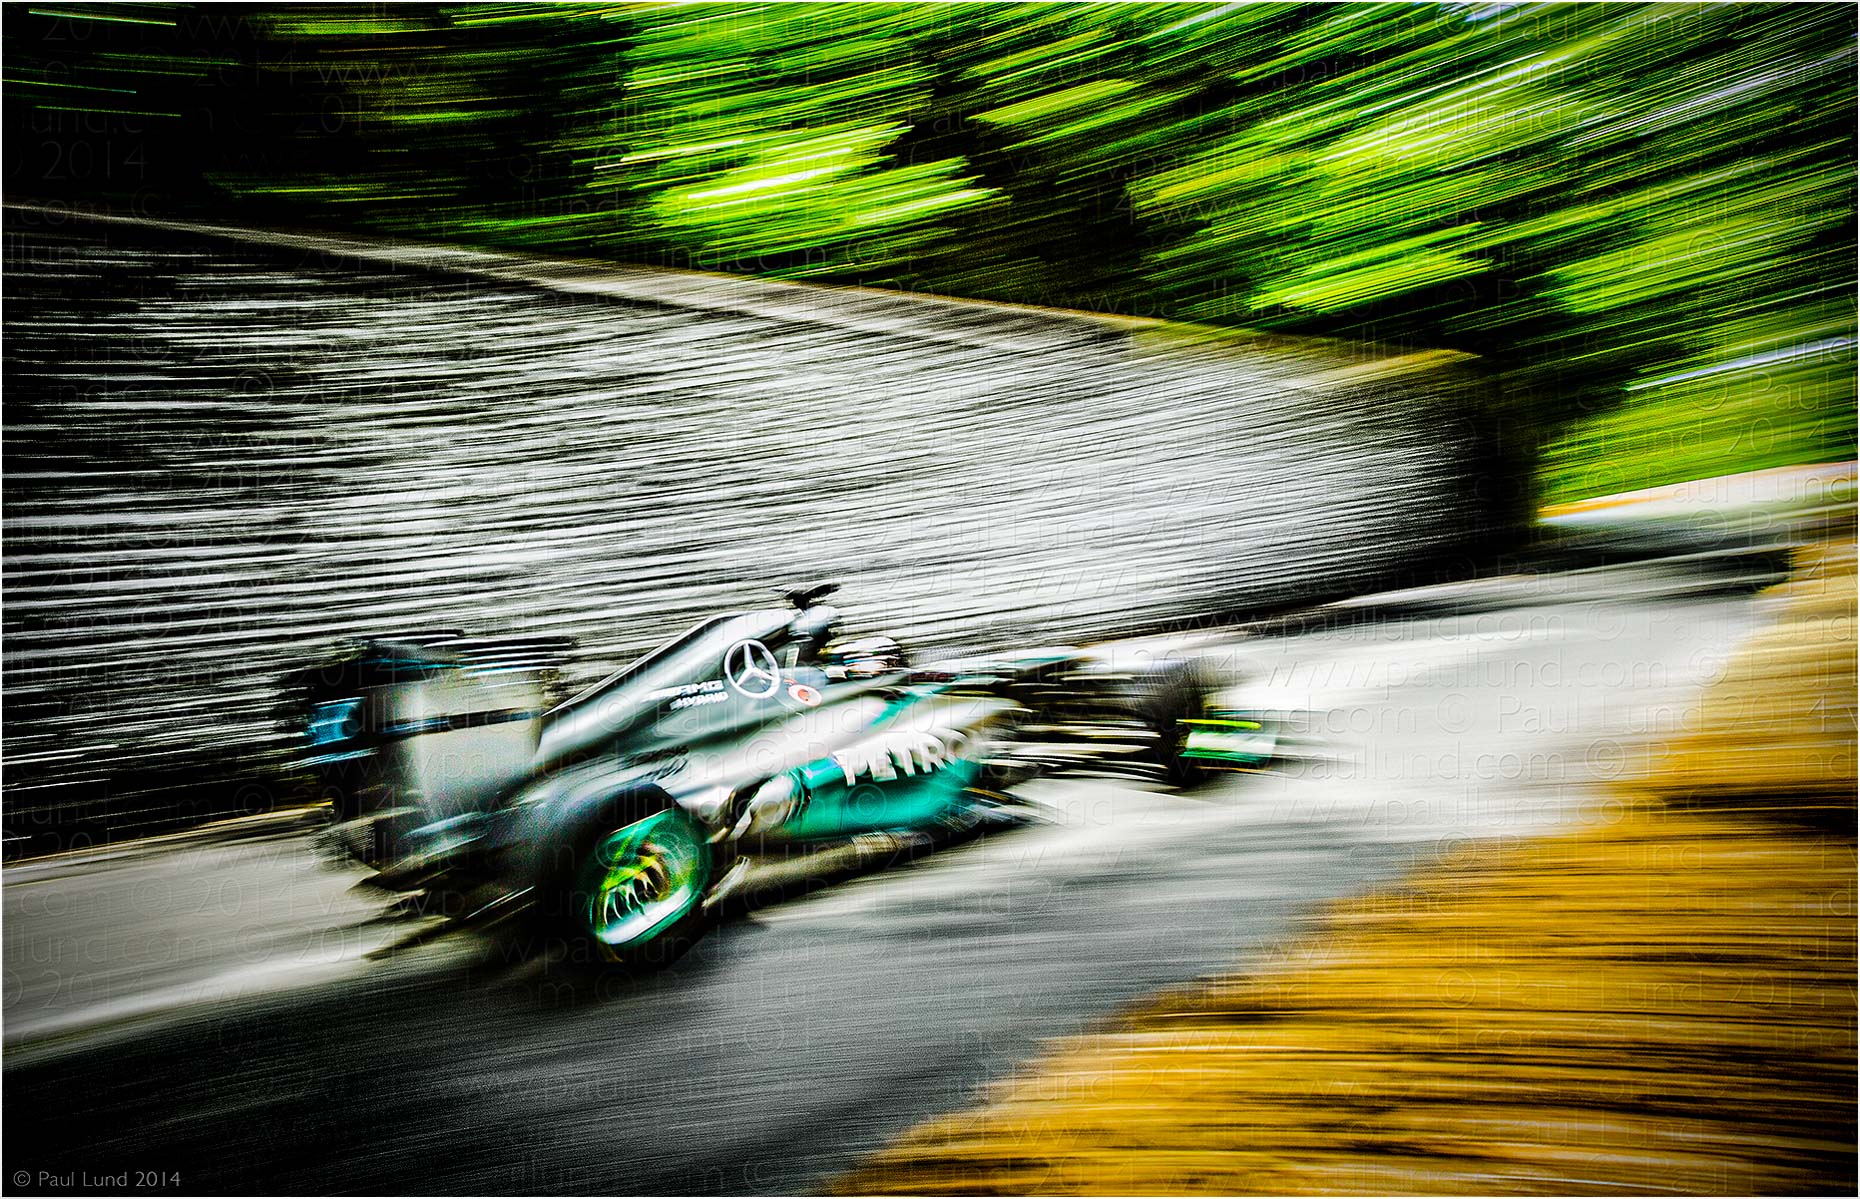 Mercedes MGP W04 at Goodwood Festival of Speed 2014. Photographer: Paul Lund